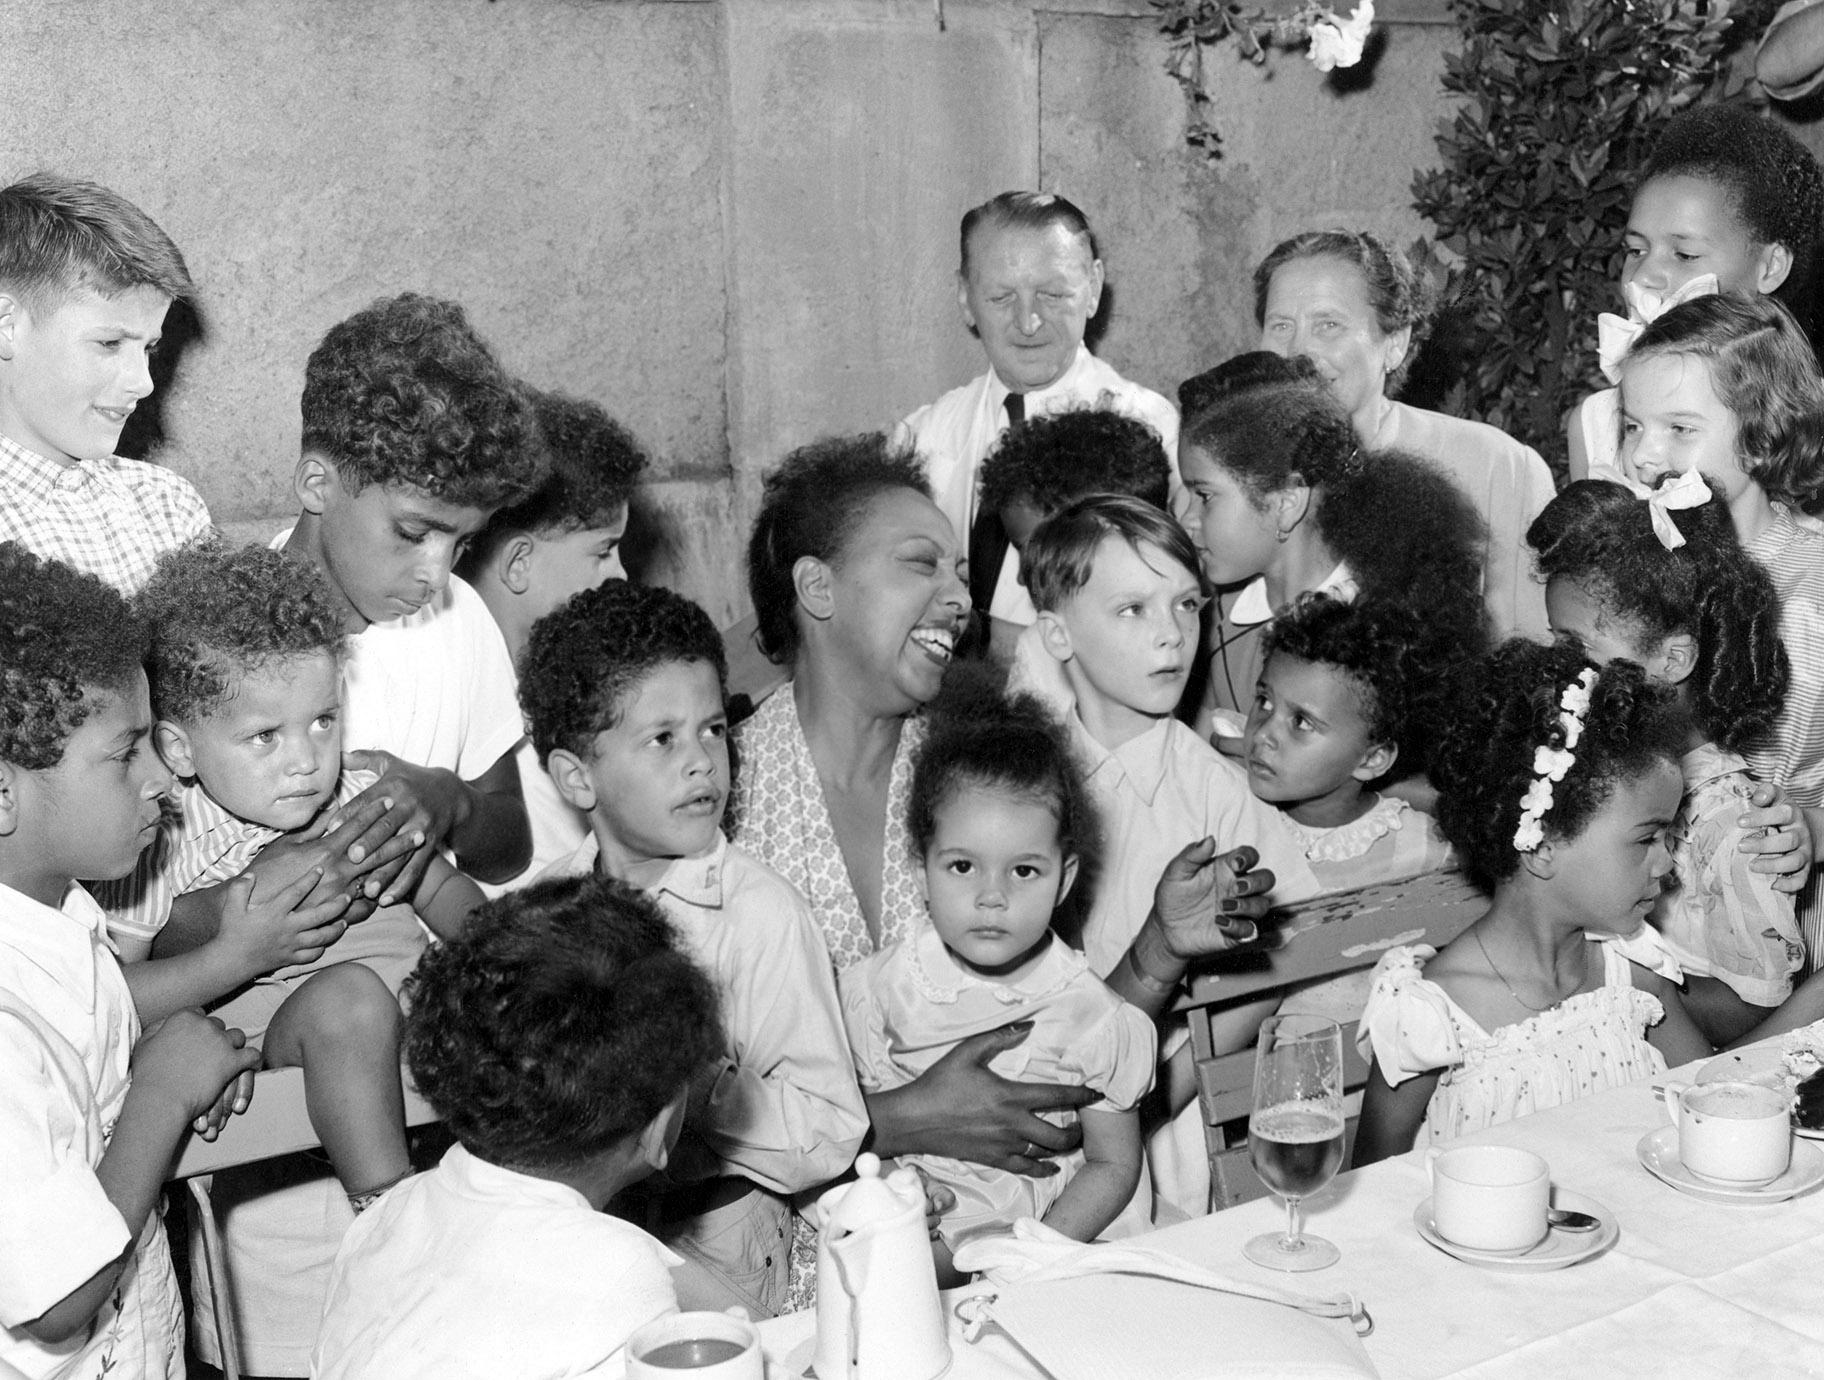 Well known American singer and dancer, Josephine Baker, who was in Berlin to play a role in German film, “An jeden Finger zehn” (Ten on Every Finger), on Aug. 3, 1954, was hostess to 40 children including orphans and local Black children, whom she treated with chocolate and cake at the zoo in West Berlin. (AP Photo / Heinrich Sanden Jr., File)